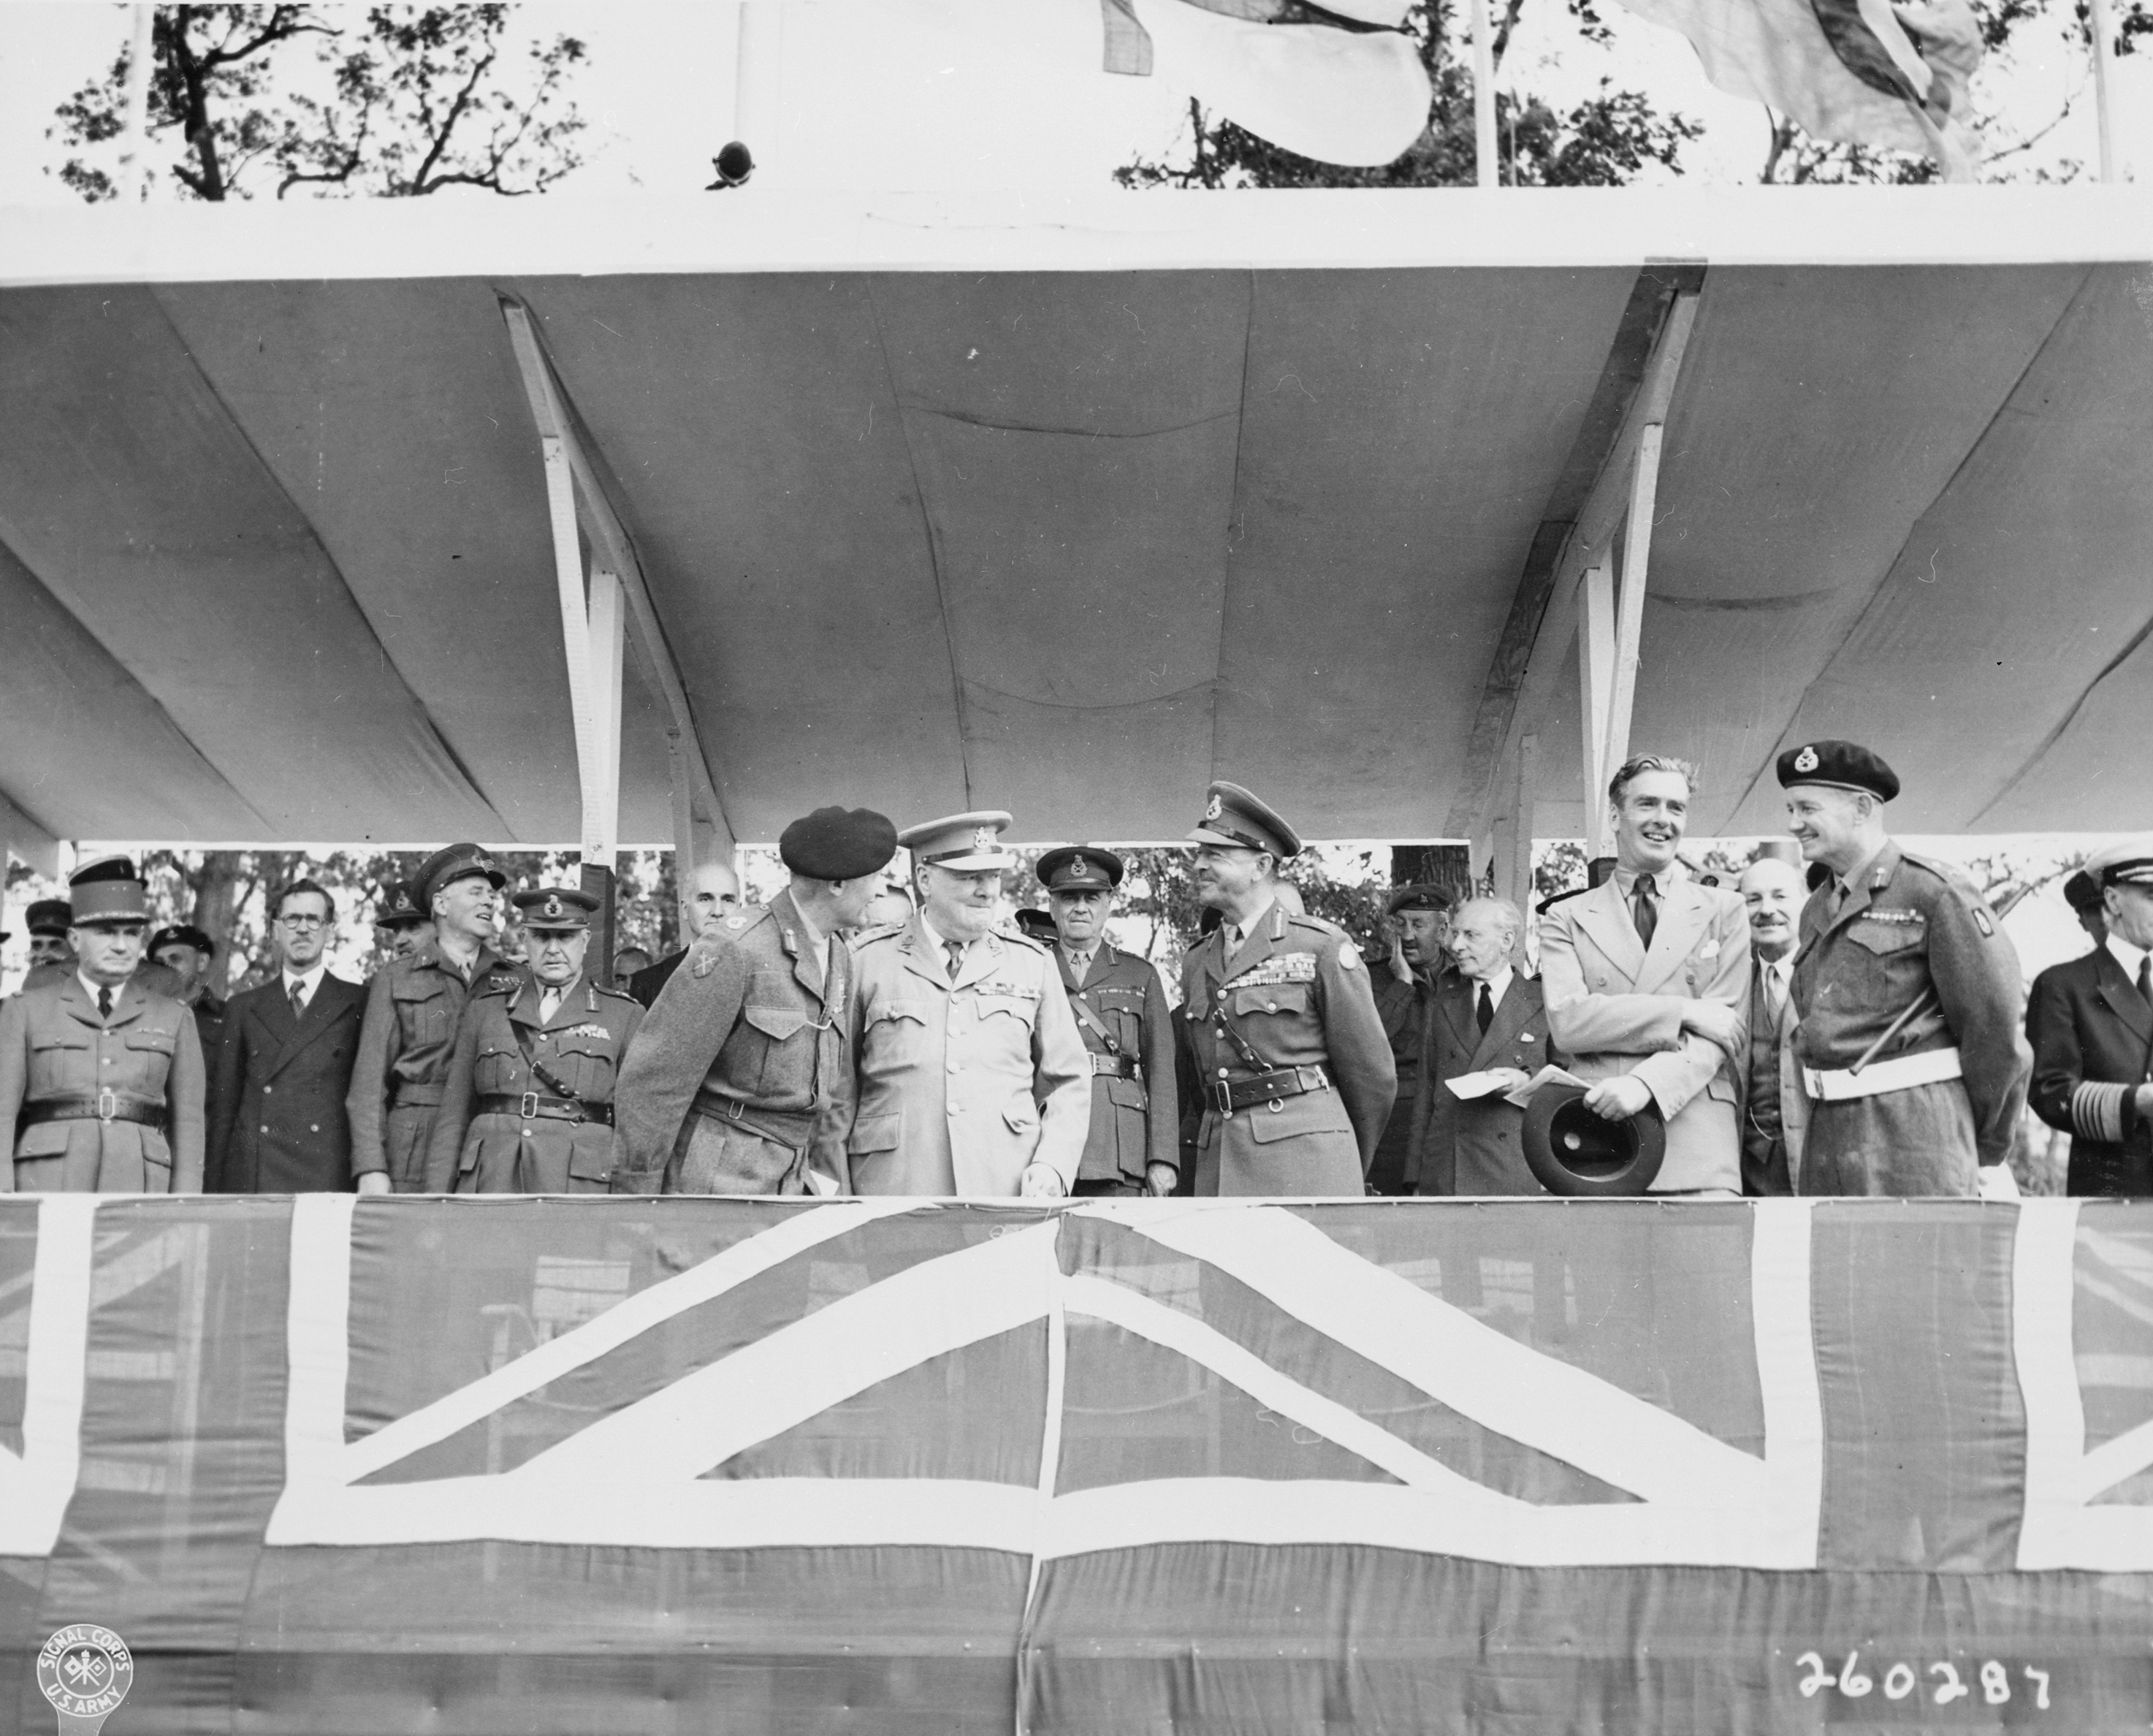 Bernard Montgomery, Winston Churchill, Harold Alexander, and Anthony Eden at the Charlottenberger Chausce reviewing stand during the Berlin victory parade, Germany, 21 Jul 1945